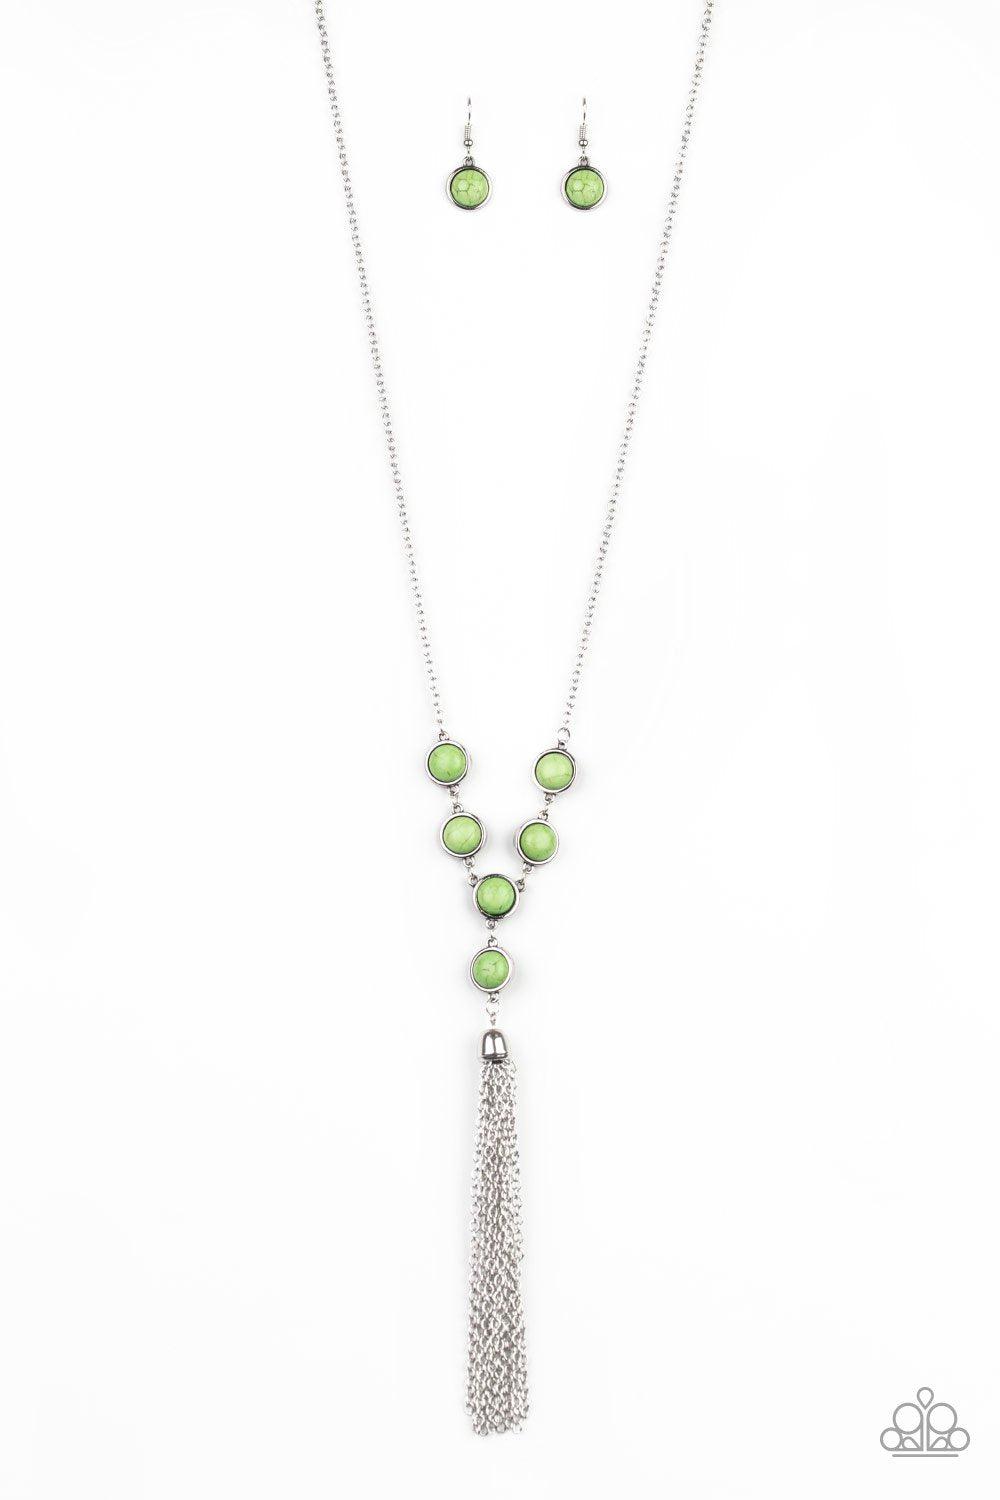 Rural Heiress Green Stone Tassel Necklace - Paparazzi Accessories-CarasShop.com - $5 Jewelry by Cara Jewels